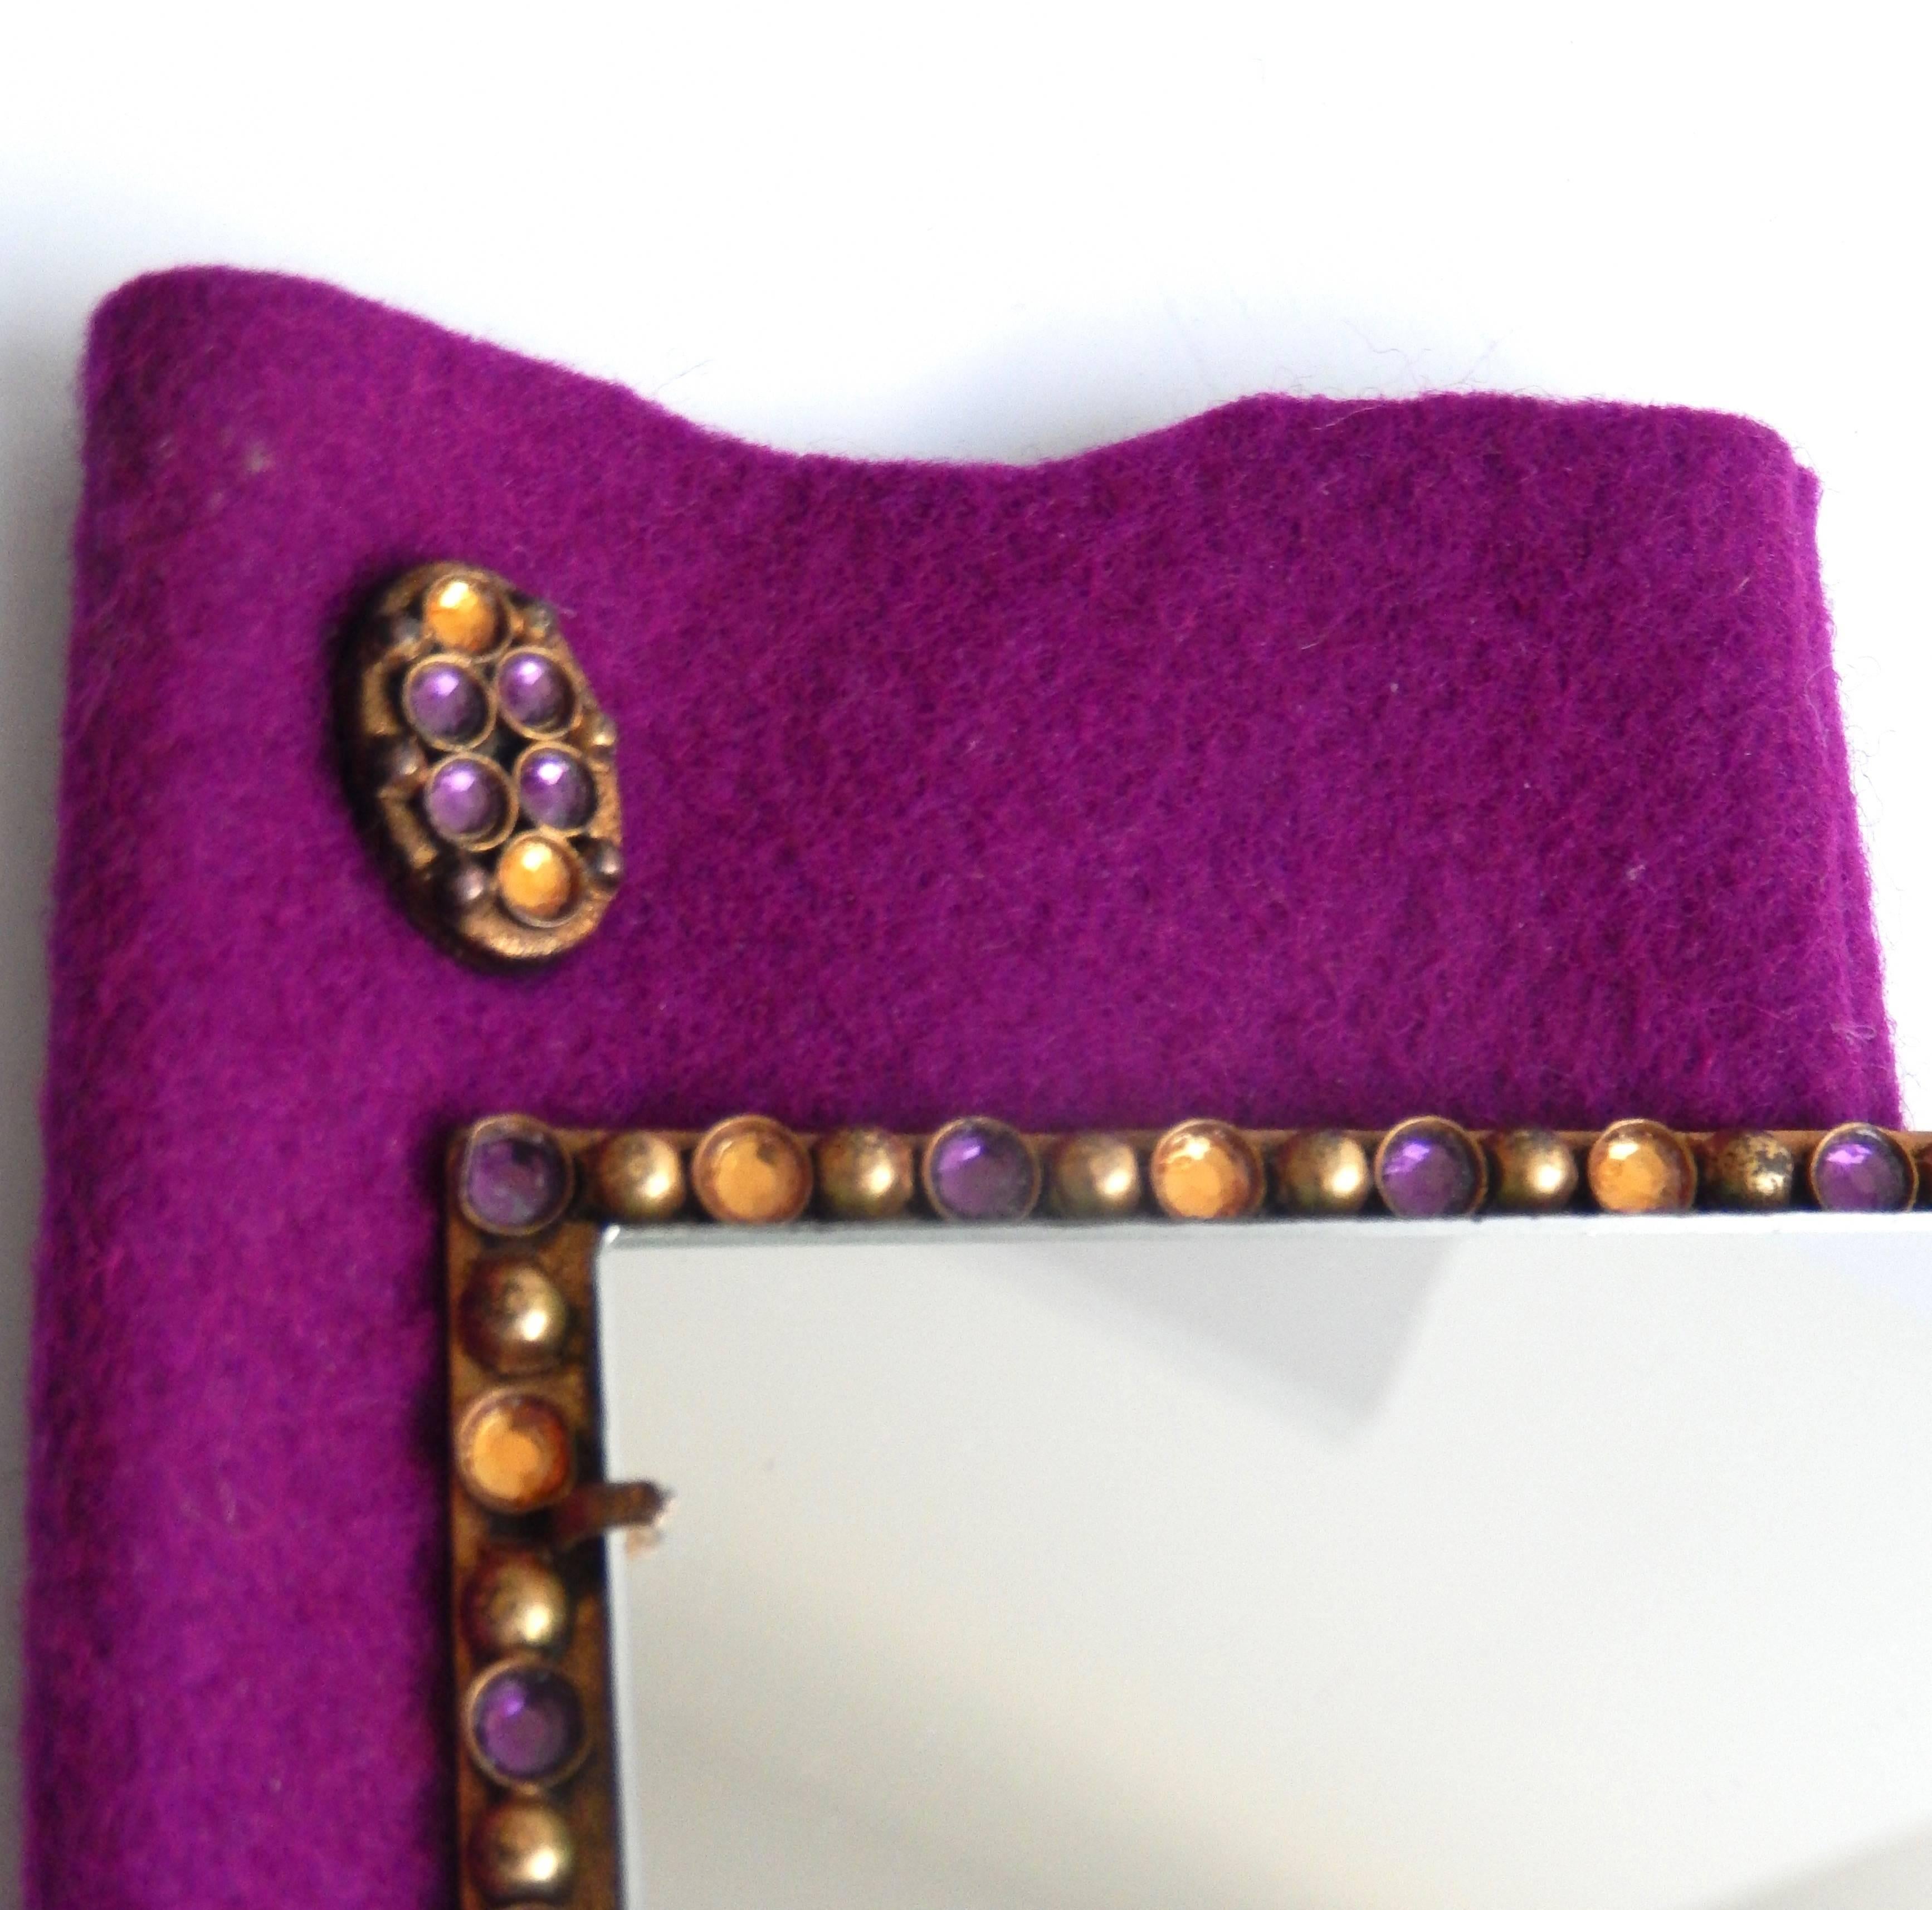 A scarce, bejeweled handbag mirror with it's original decorated felt pouch by the French designer Henry Perichon (1910-72).  The design is inspired by Renaissance and Medieval jewelry with its elegant border of colored glass stones resembling